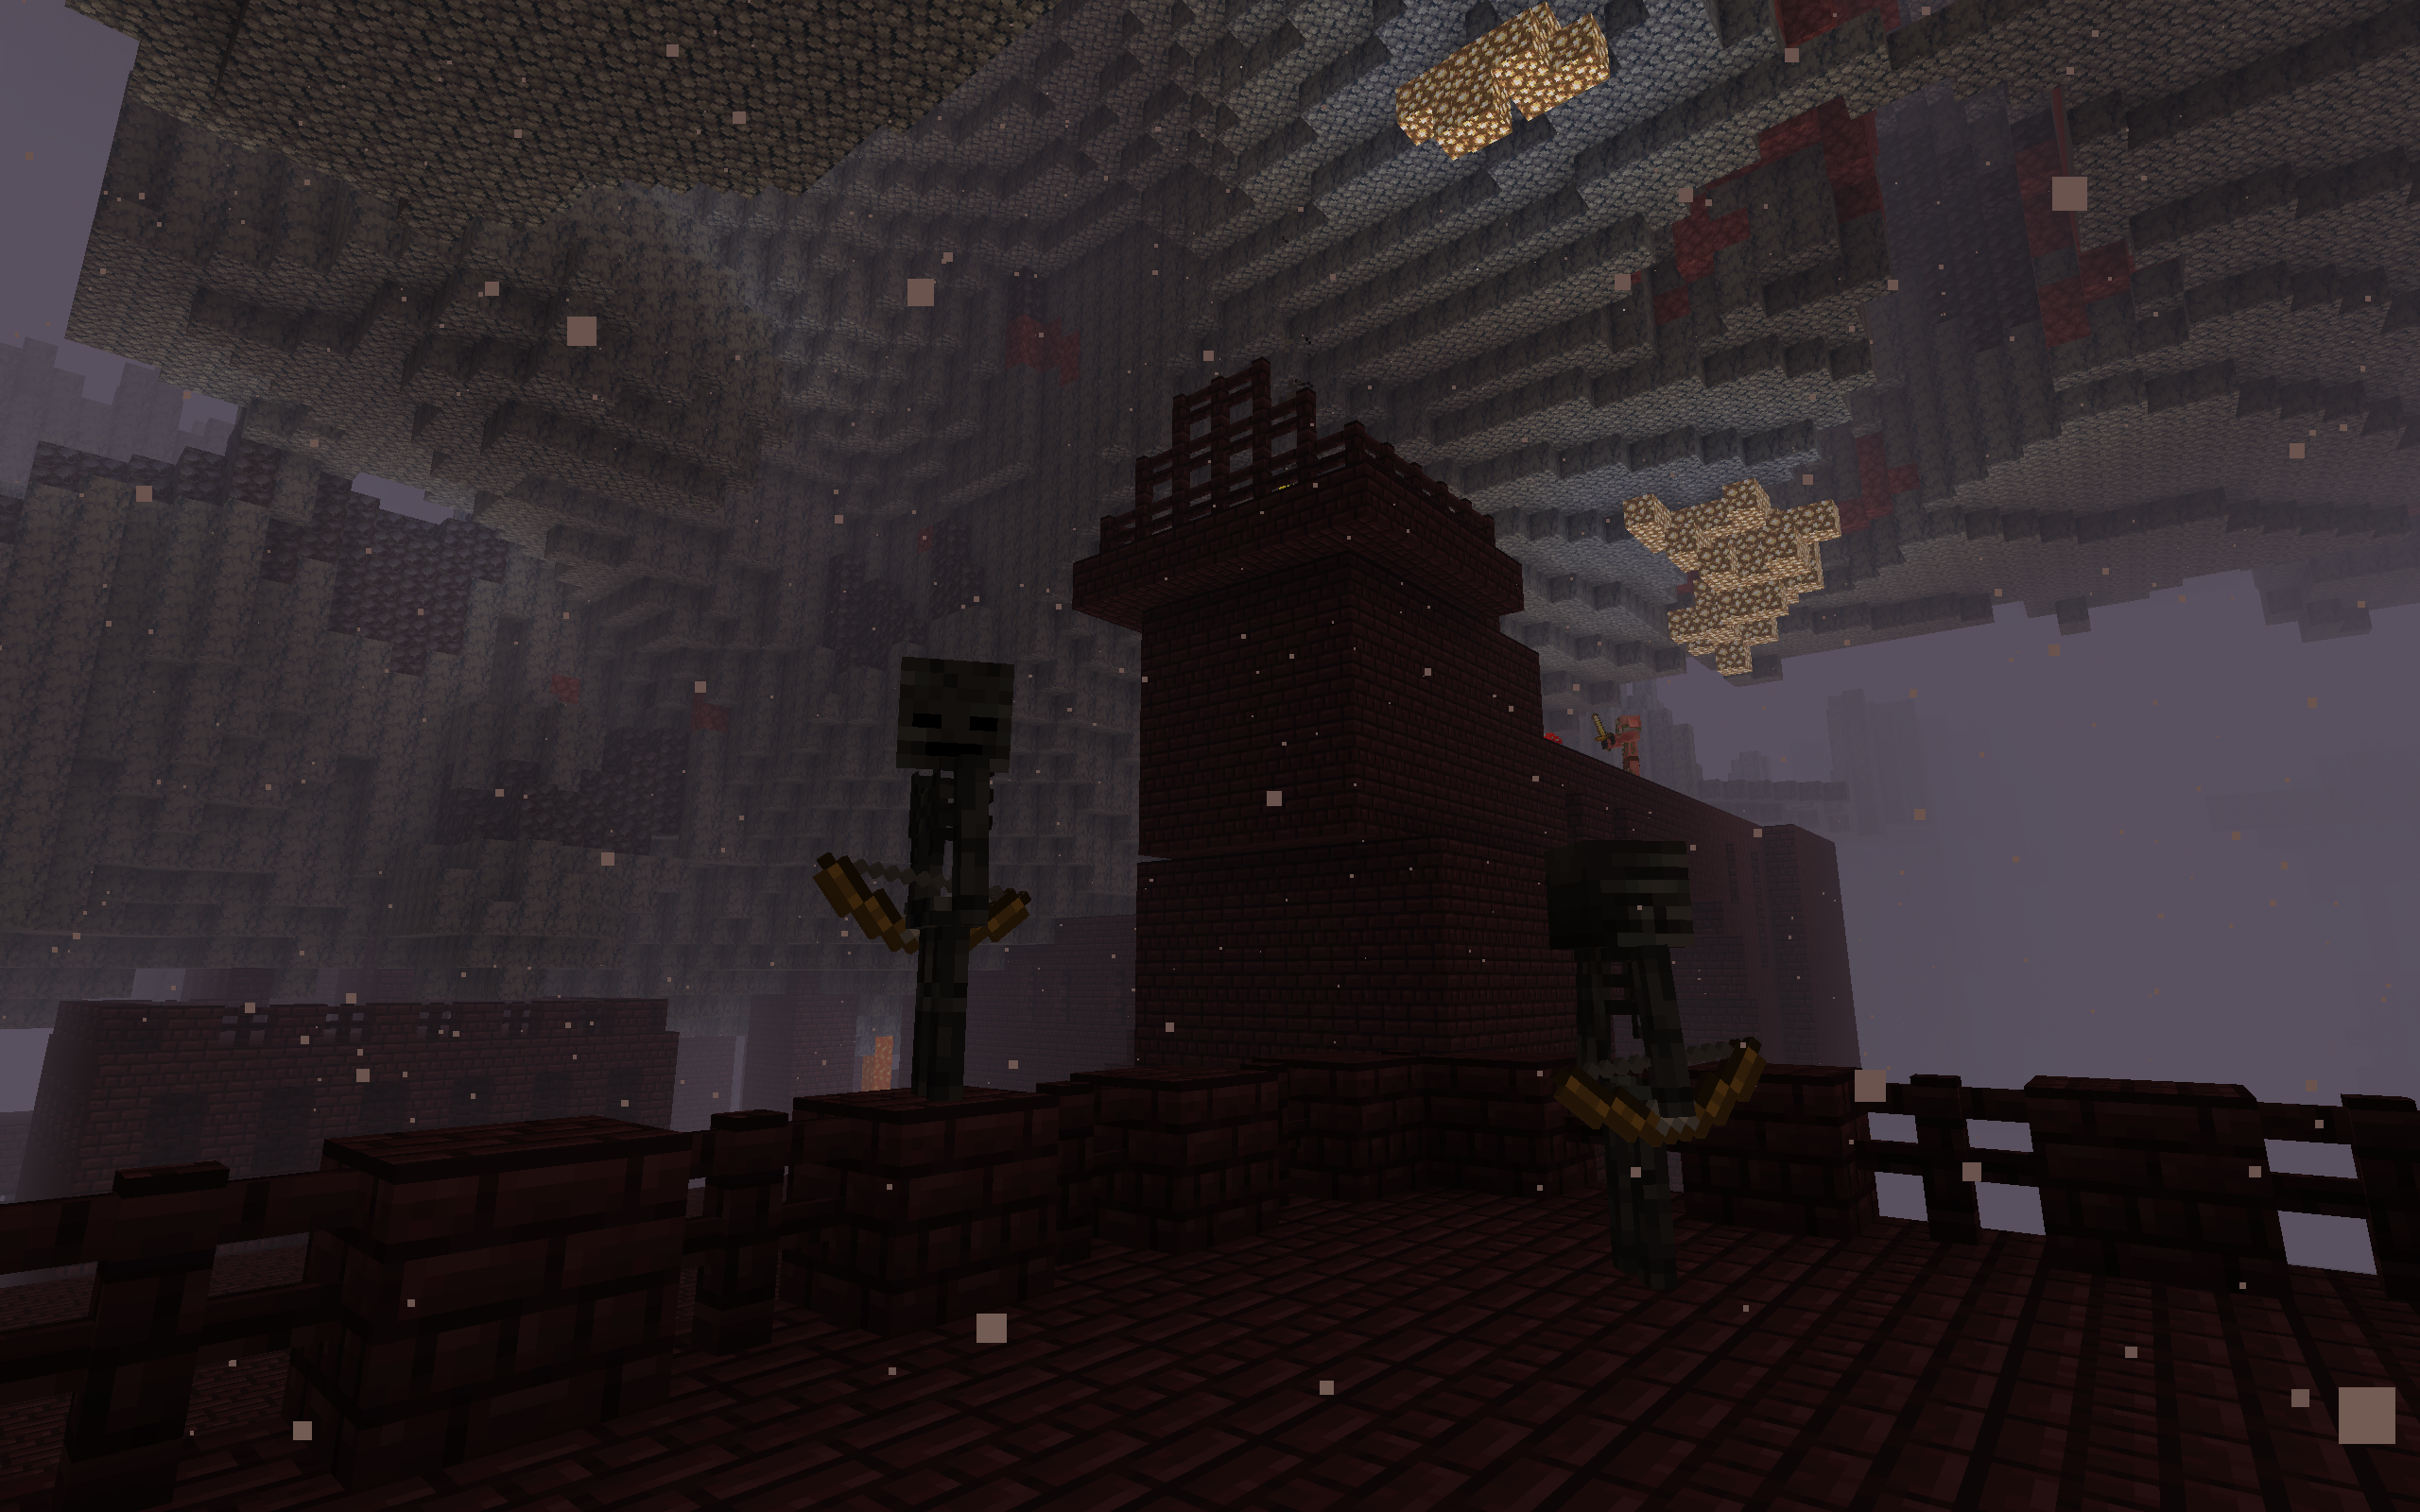 Wither skeleton archers guarding a fortress.